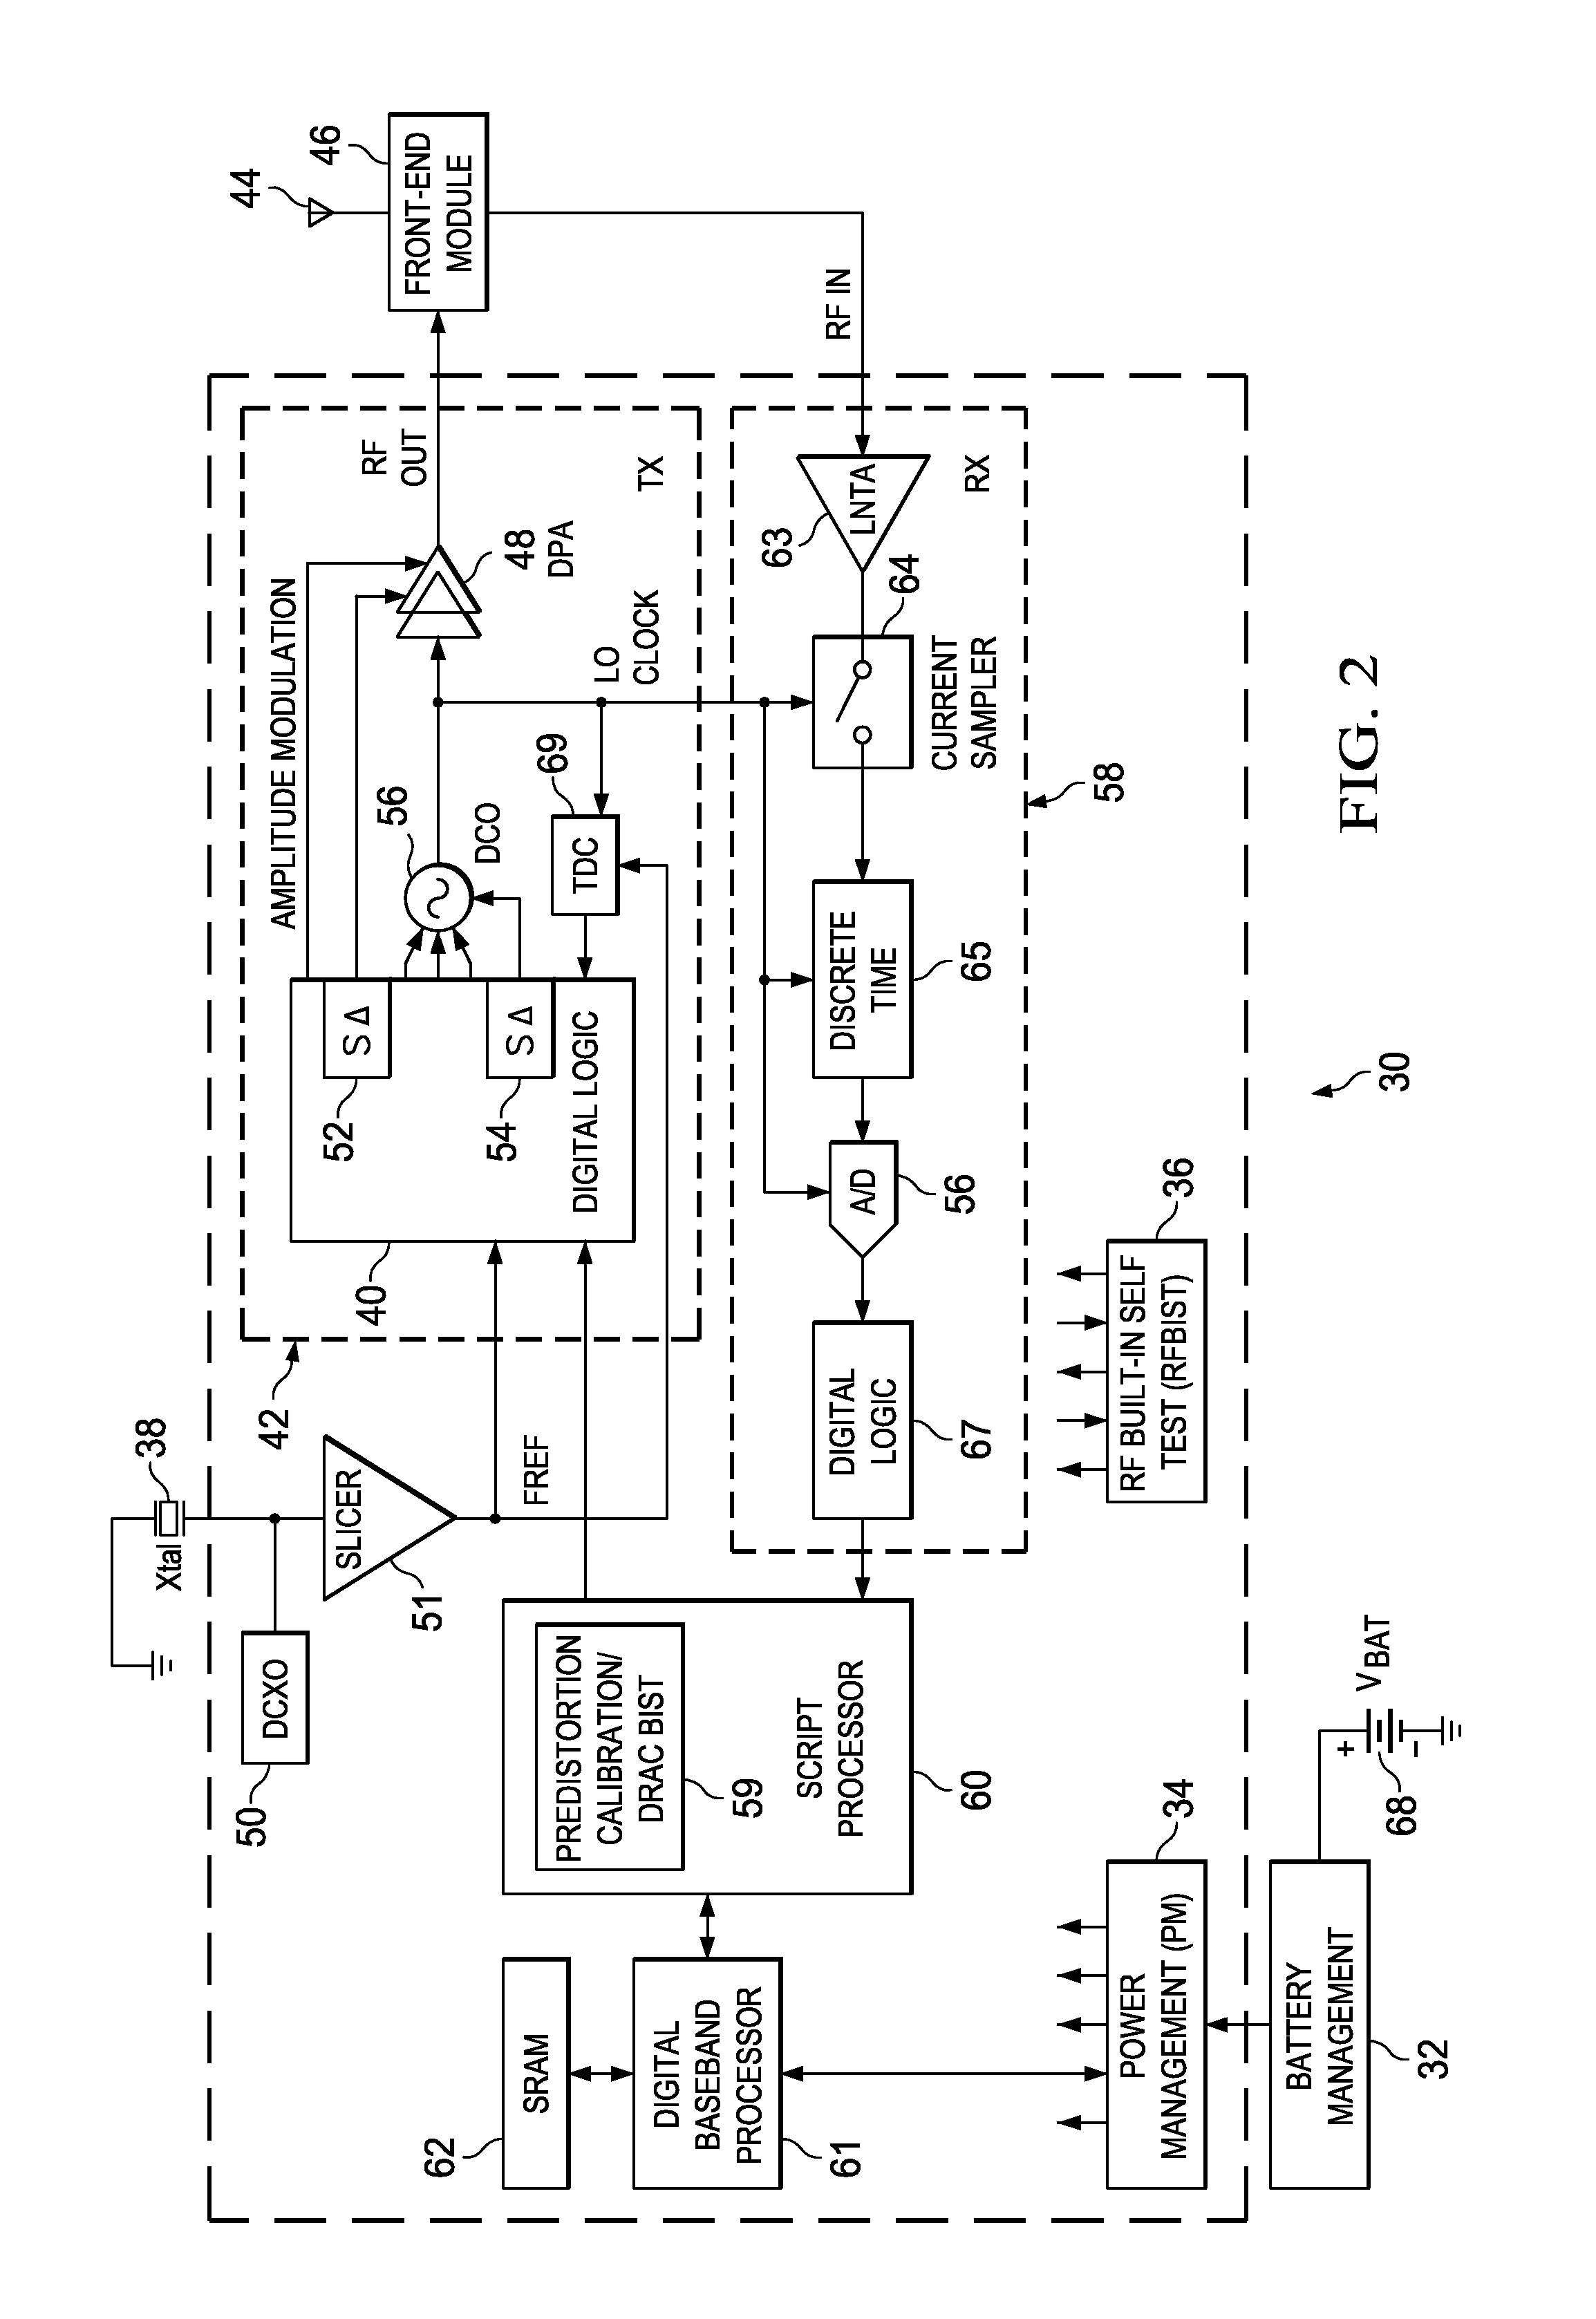 Predistortion calibration and built in self testing of a radio frequency power amplifier using subharmonic mixing